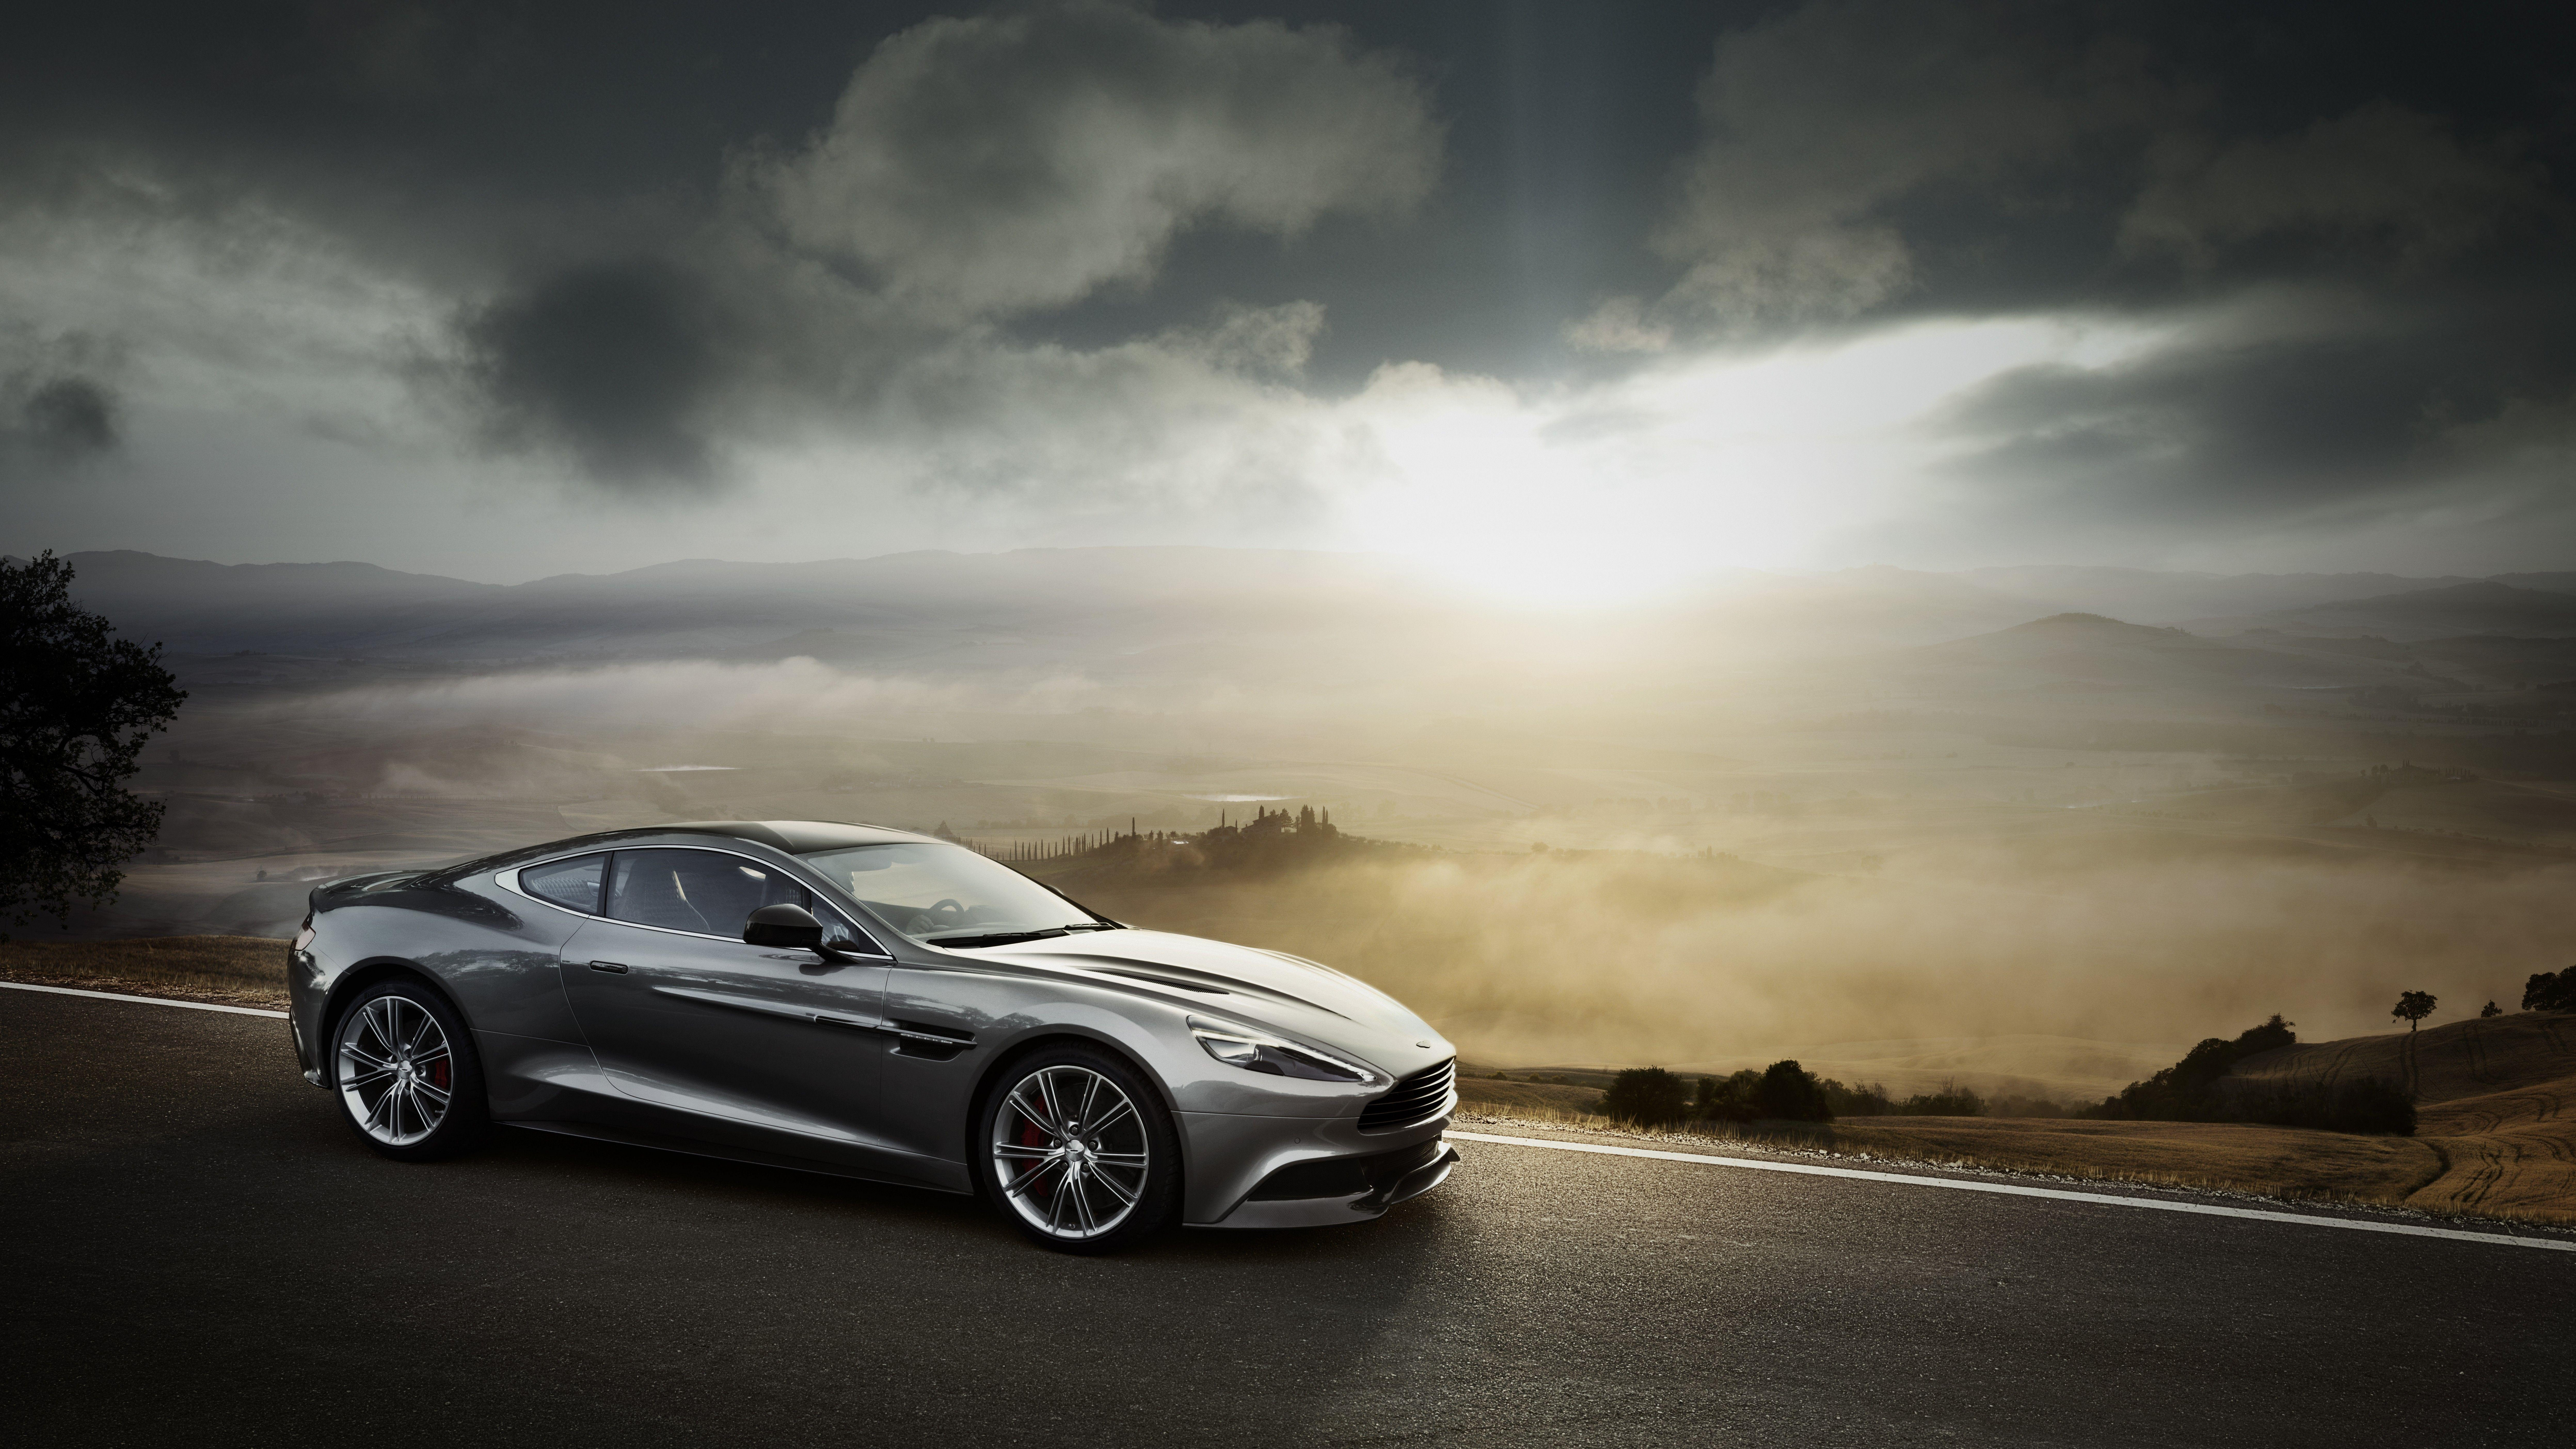 Gray Mercedes Benz Coupe on Road During Sunset. Wallpaper in 7680x4320 Resolution